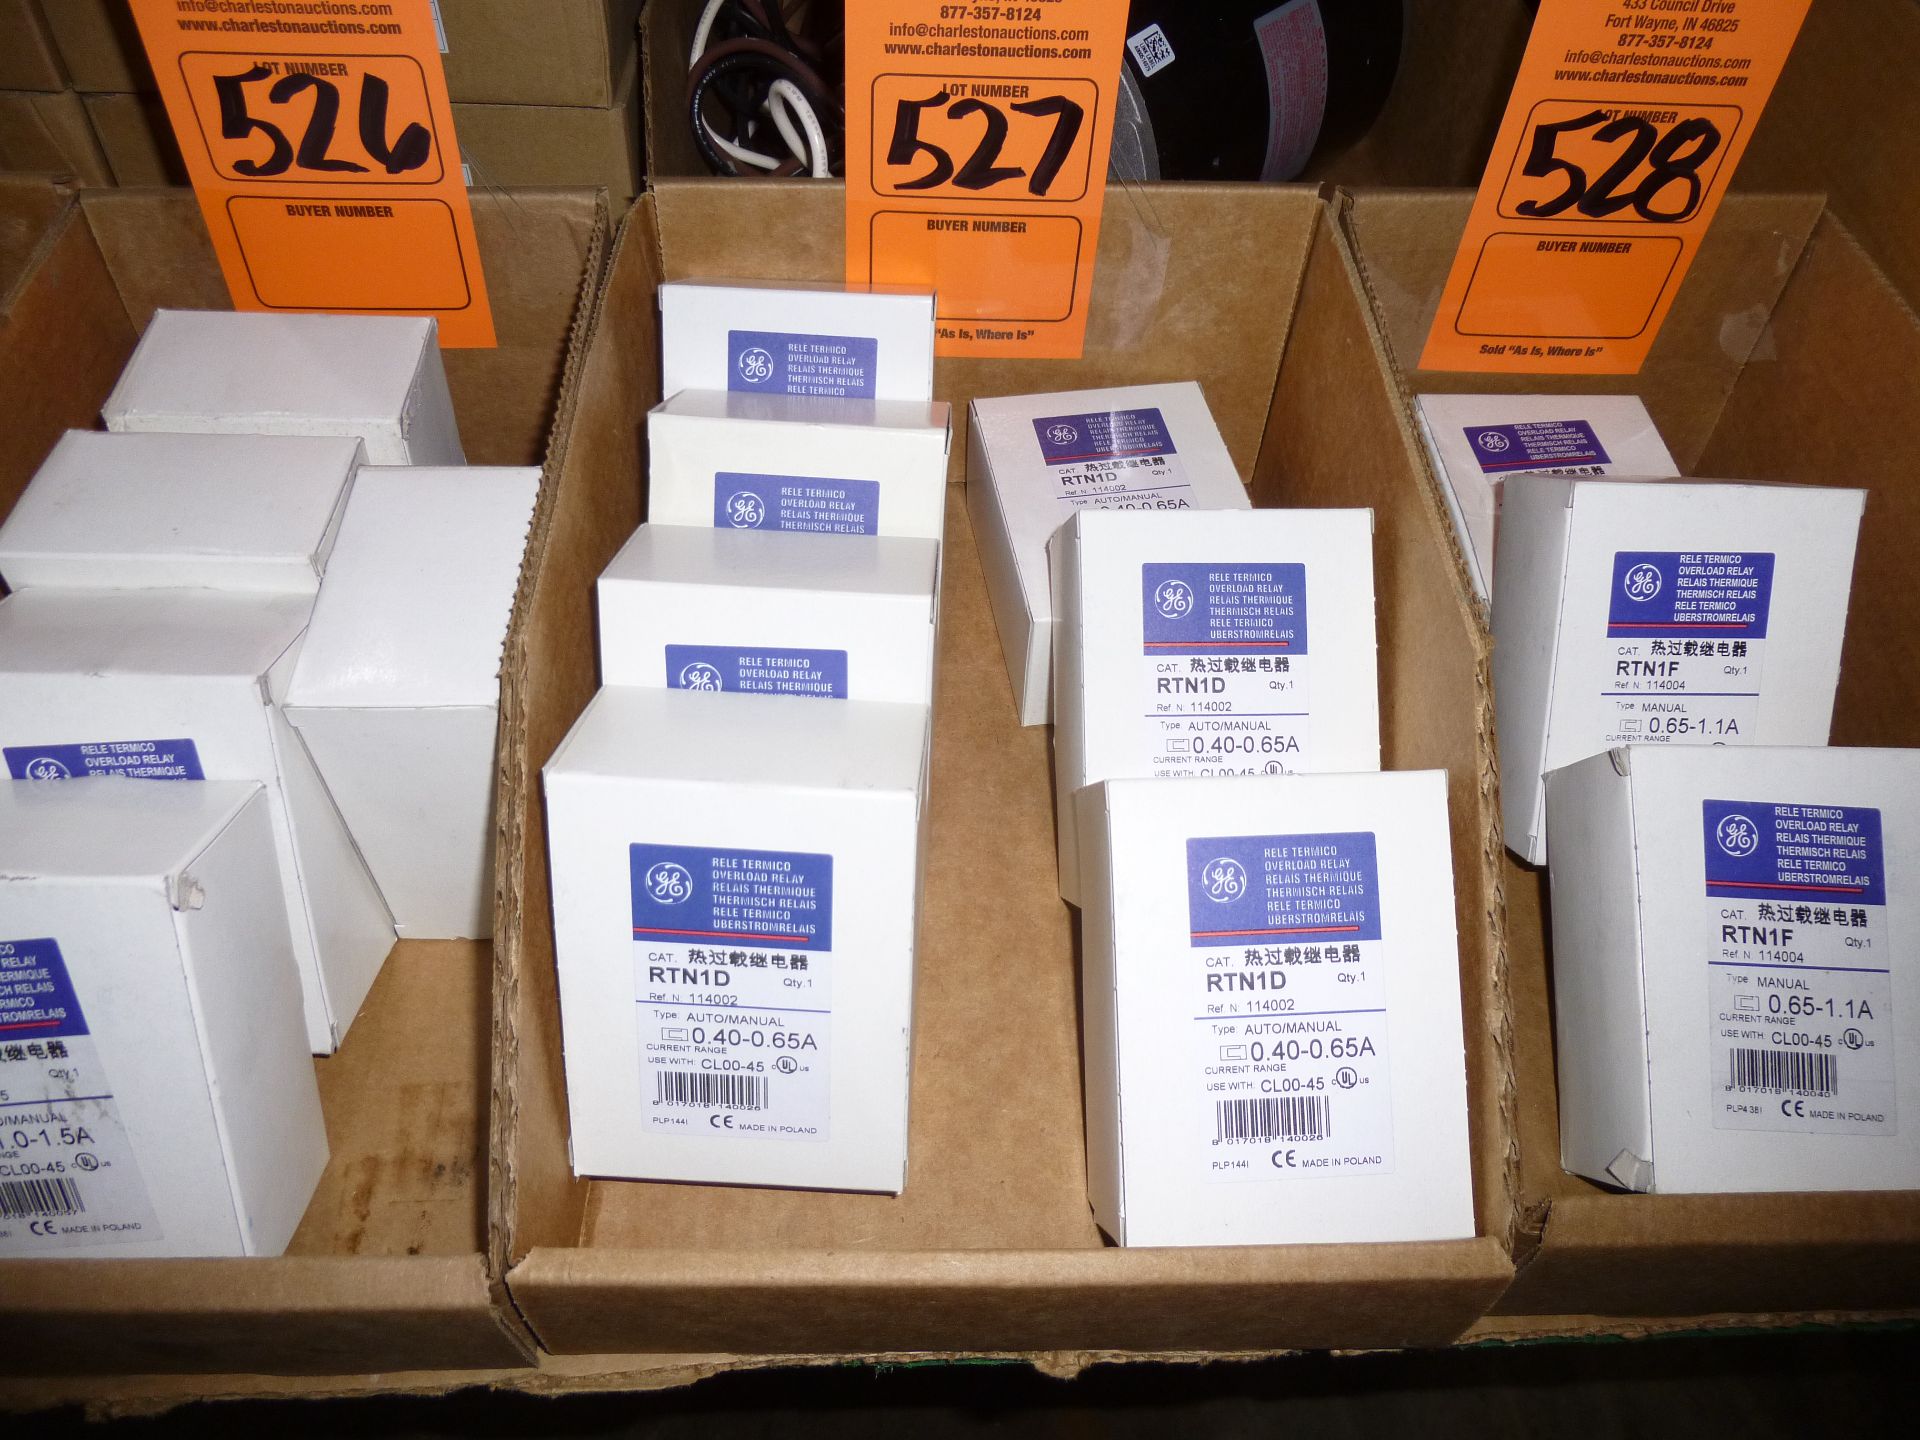 Qty 7 GE relay model RTN1D, new in boxes, as always with Brolyn LLC auctions, all lots can be picked